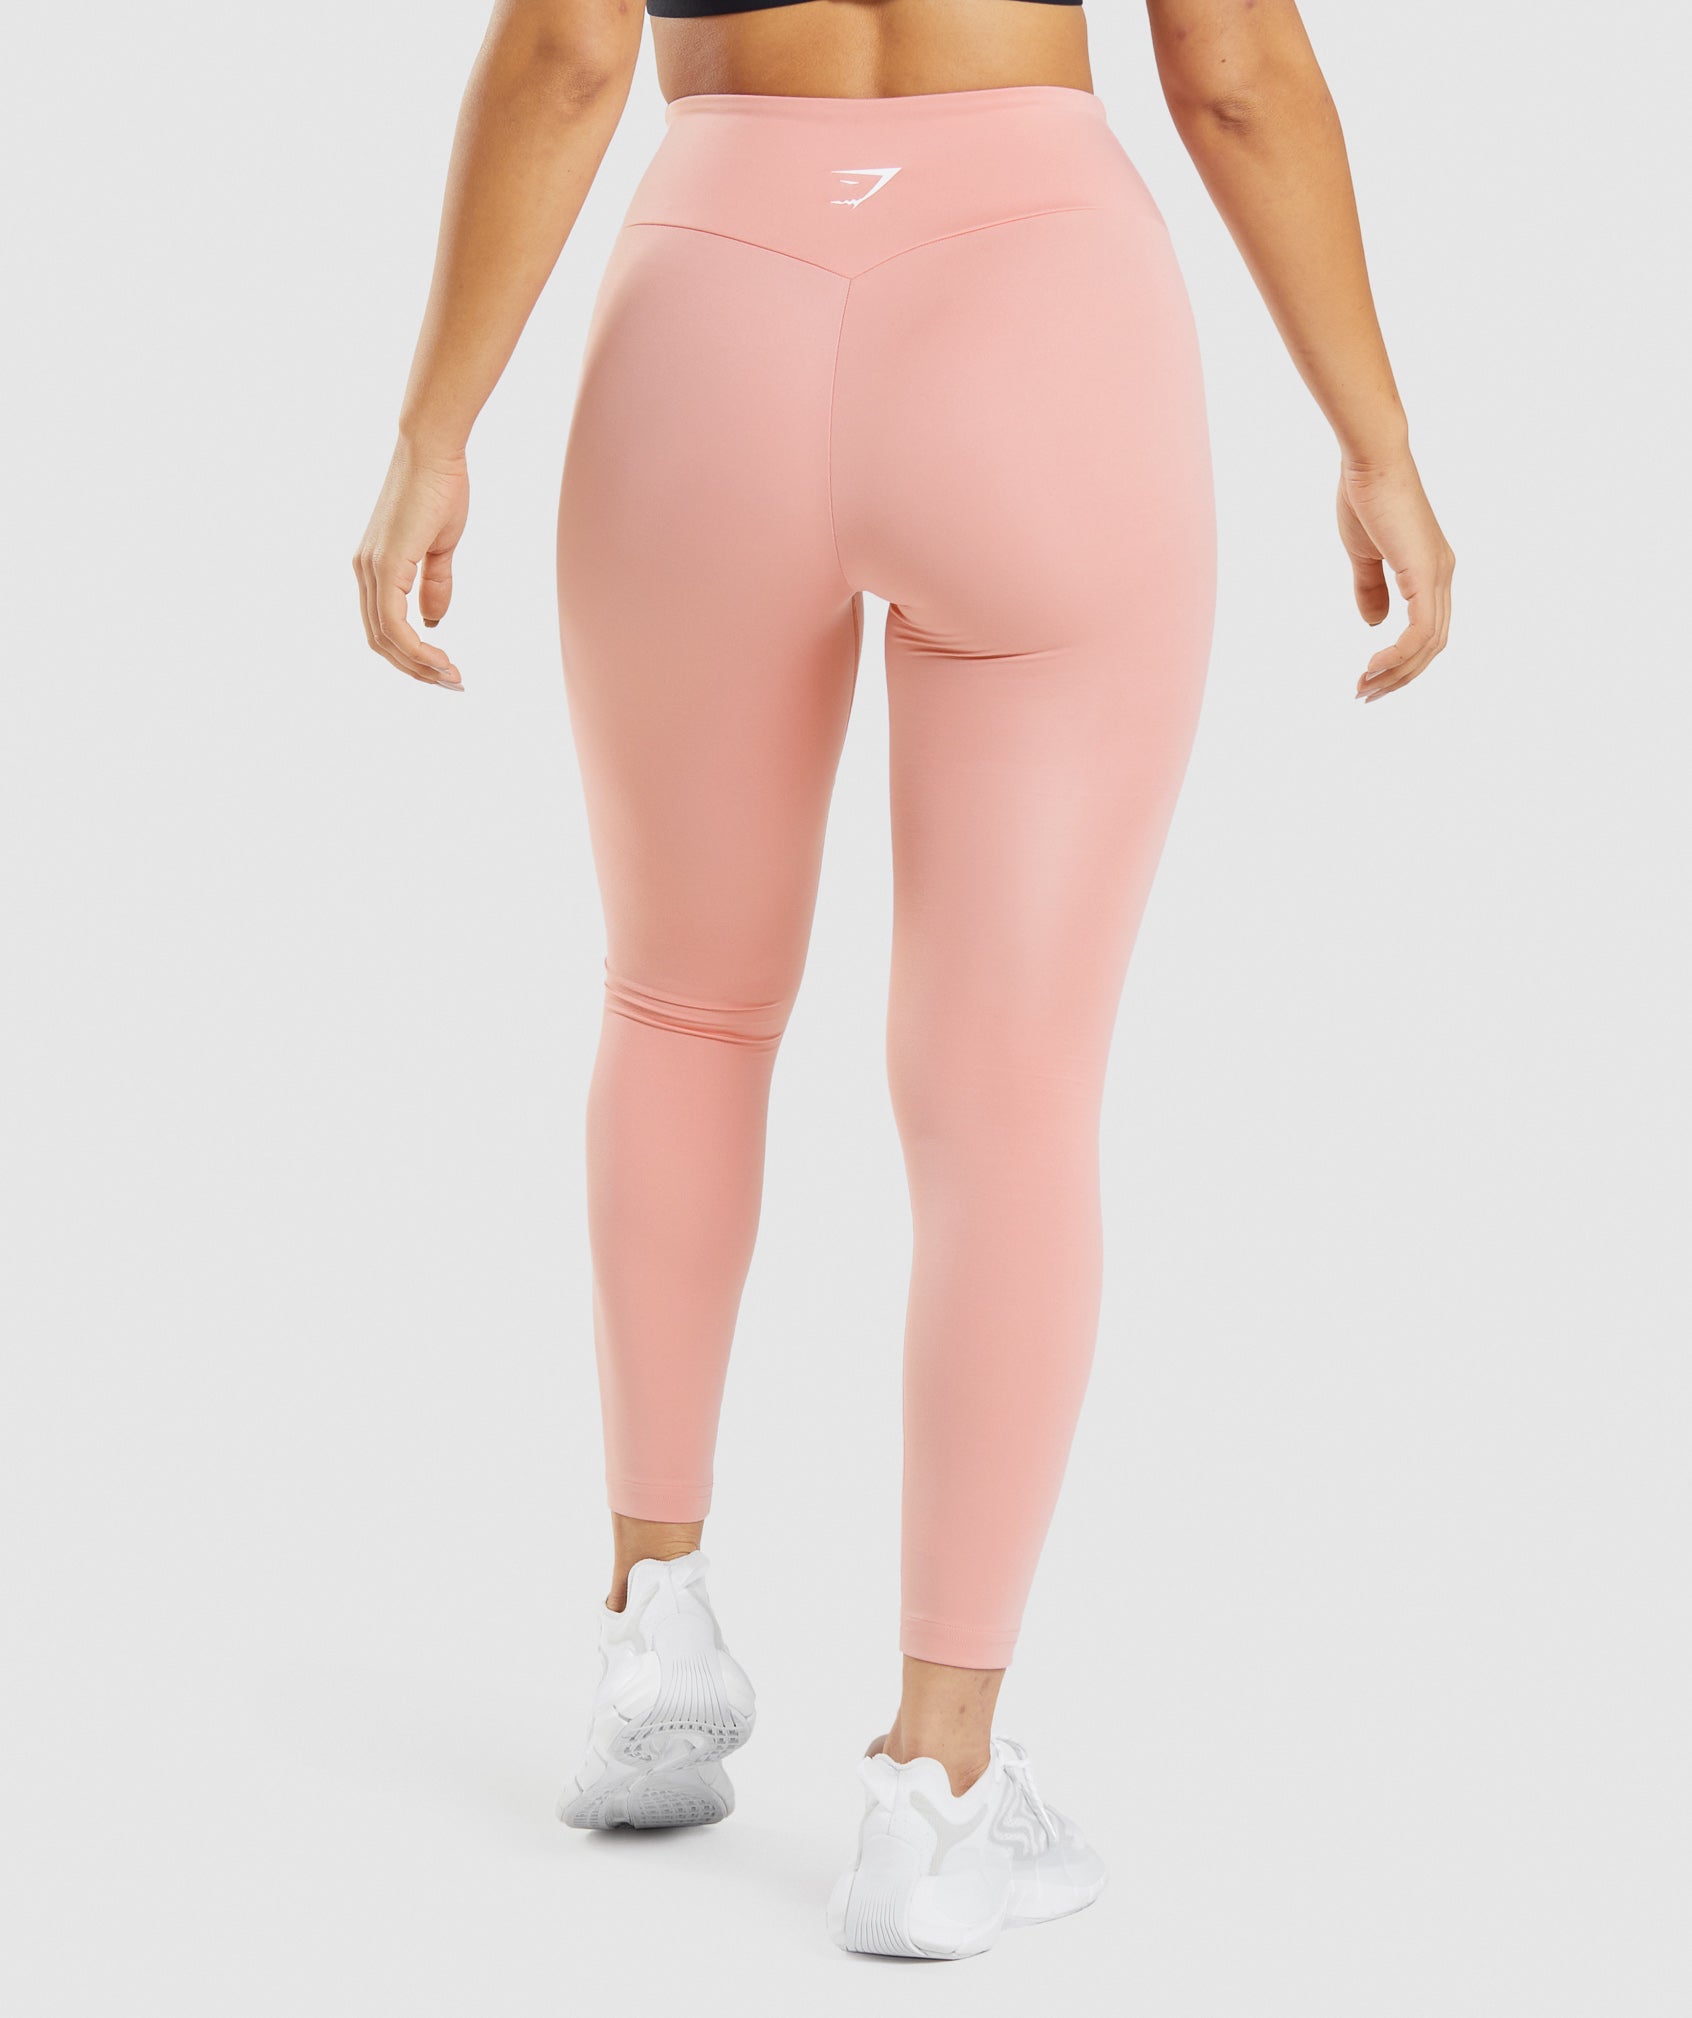 Training Leggings in Paige Pink - view 2